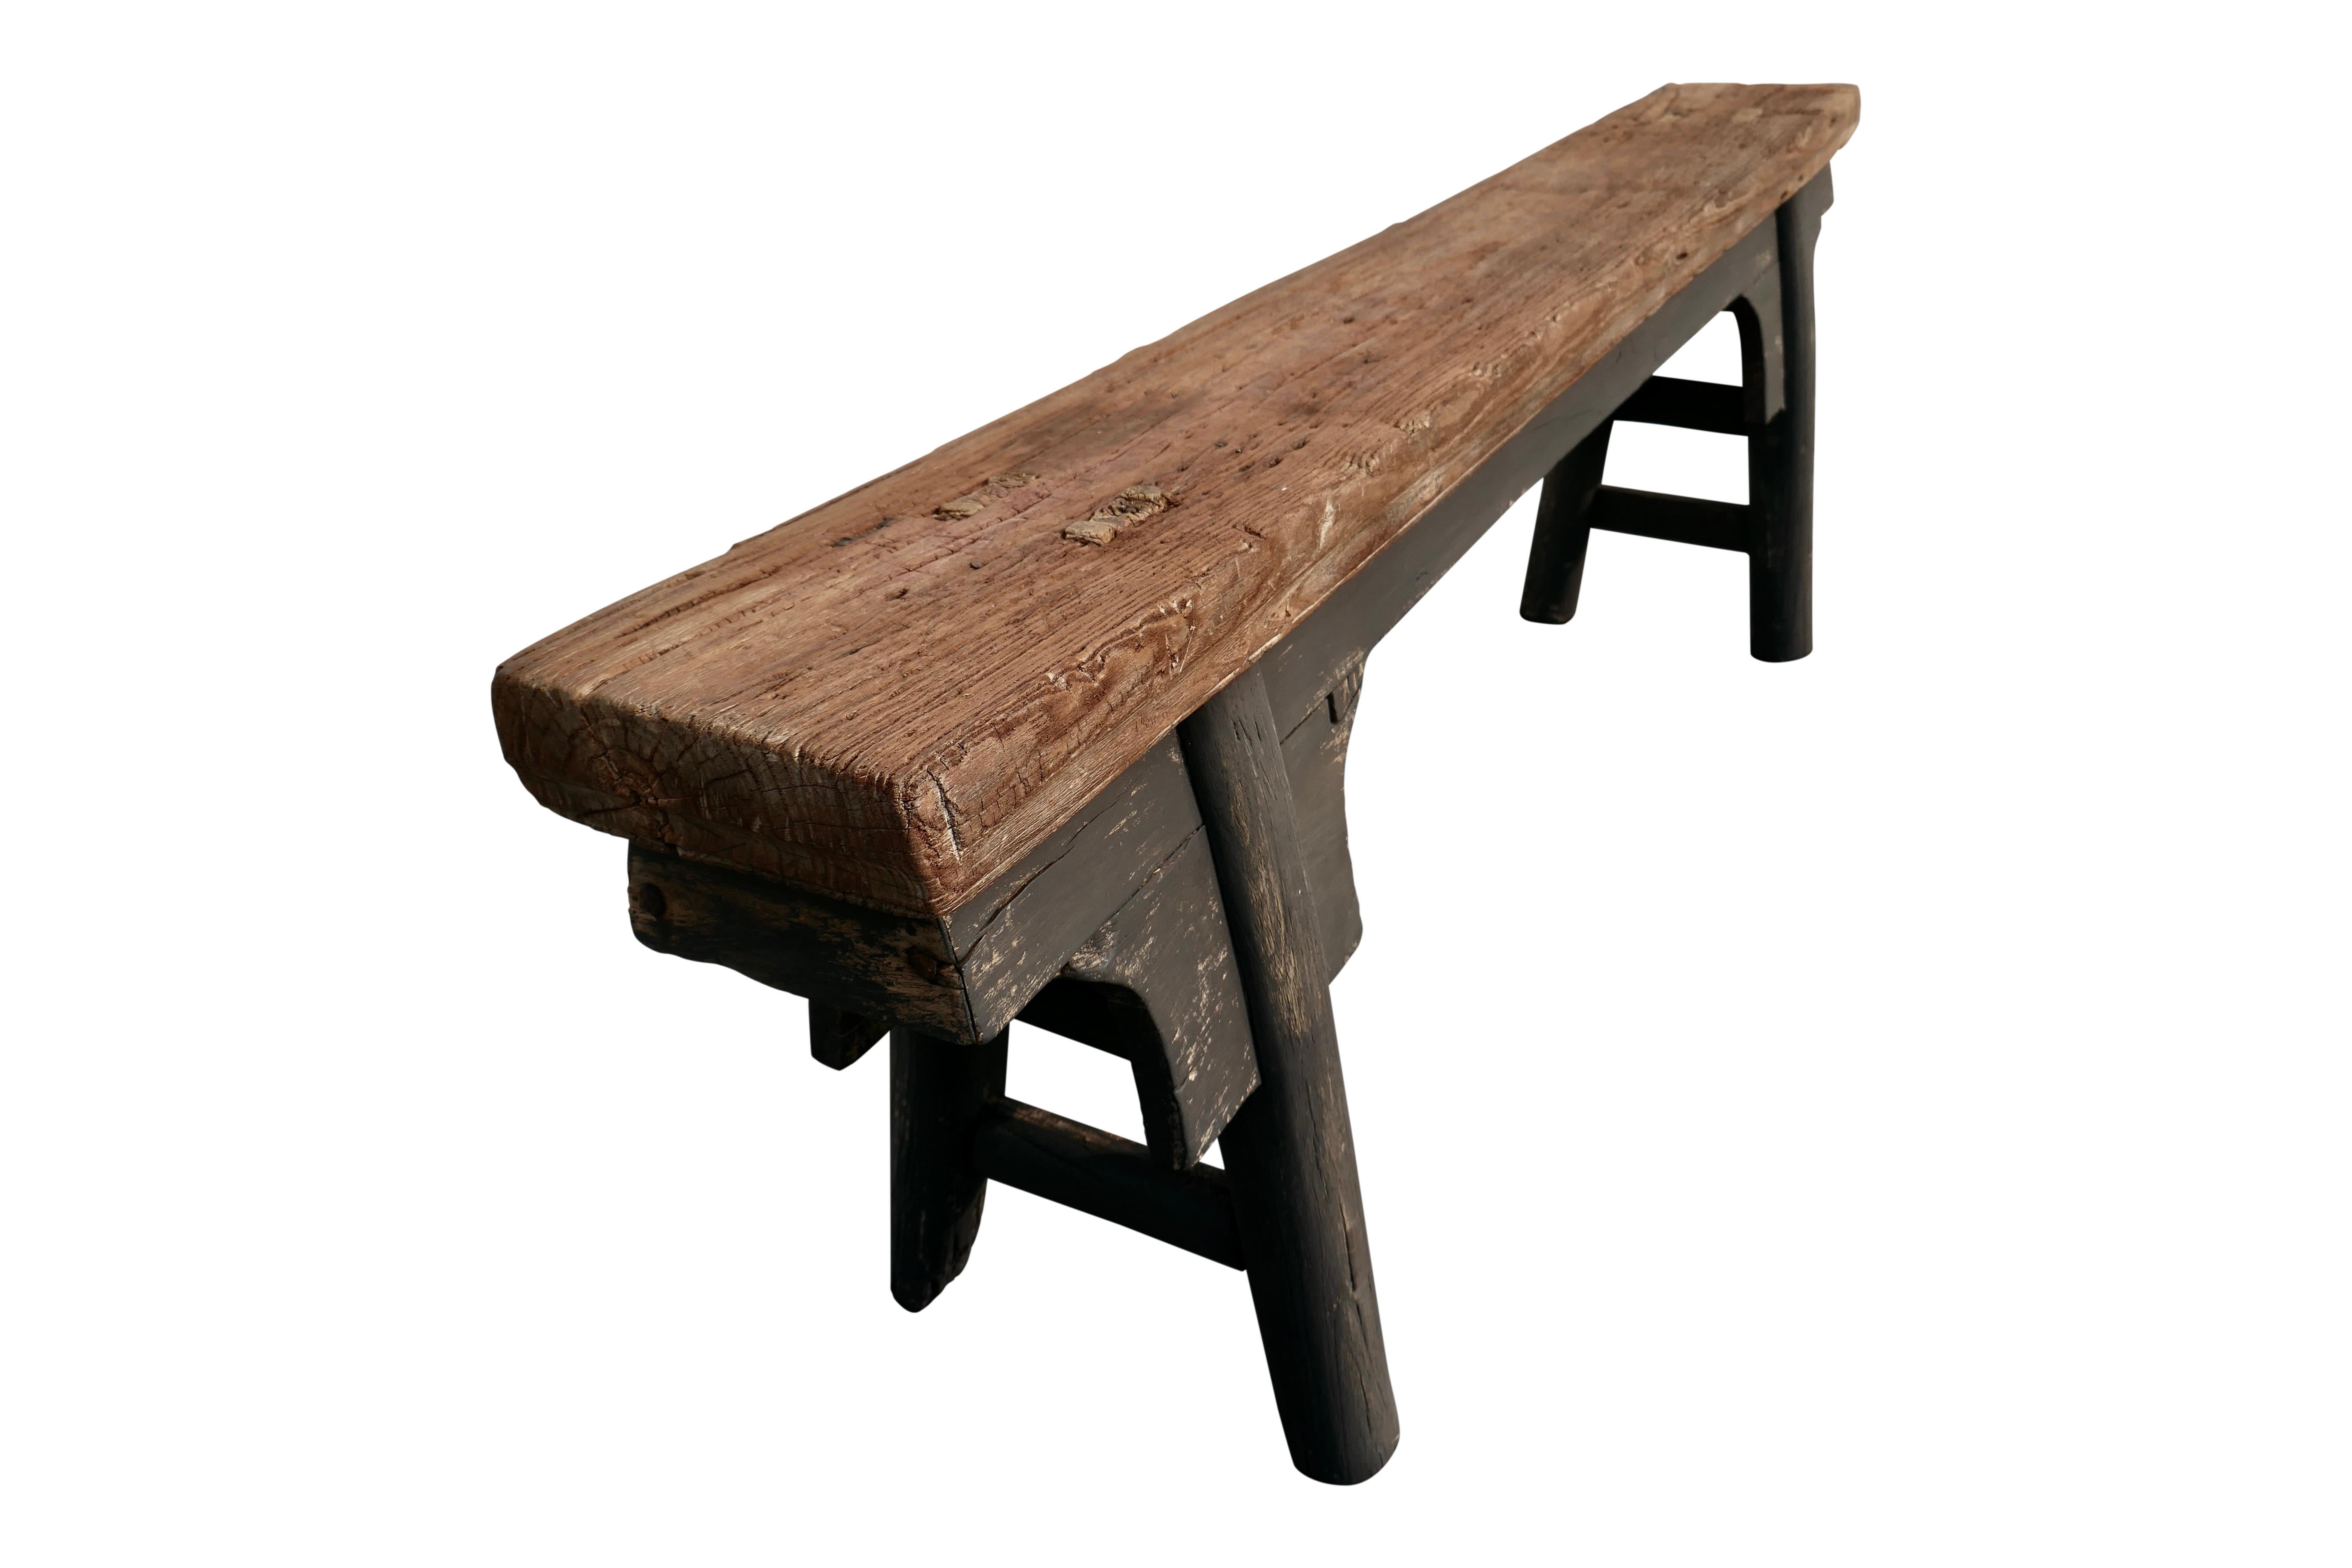 Asian Antique Shandong Elm Bench, Rustic, One-of-a-Kind For Sale